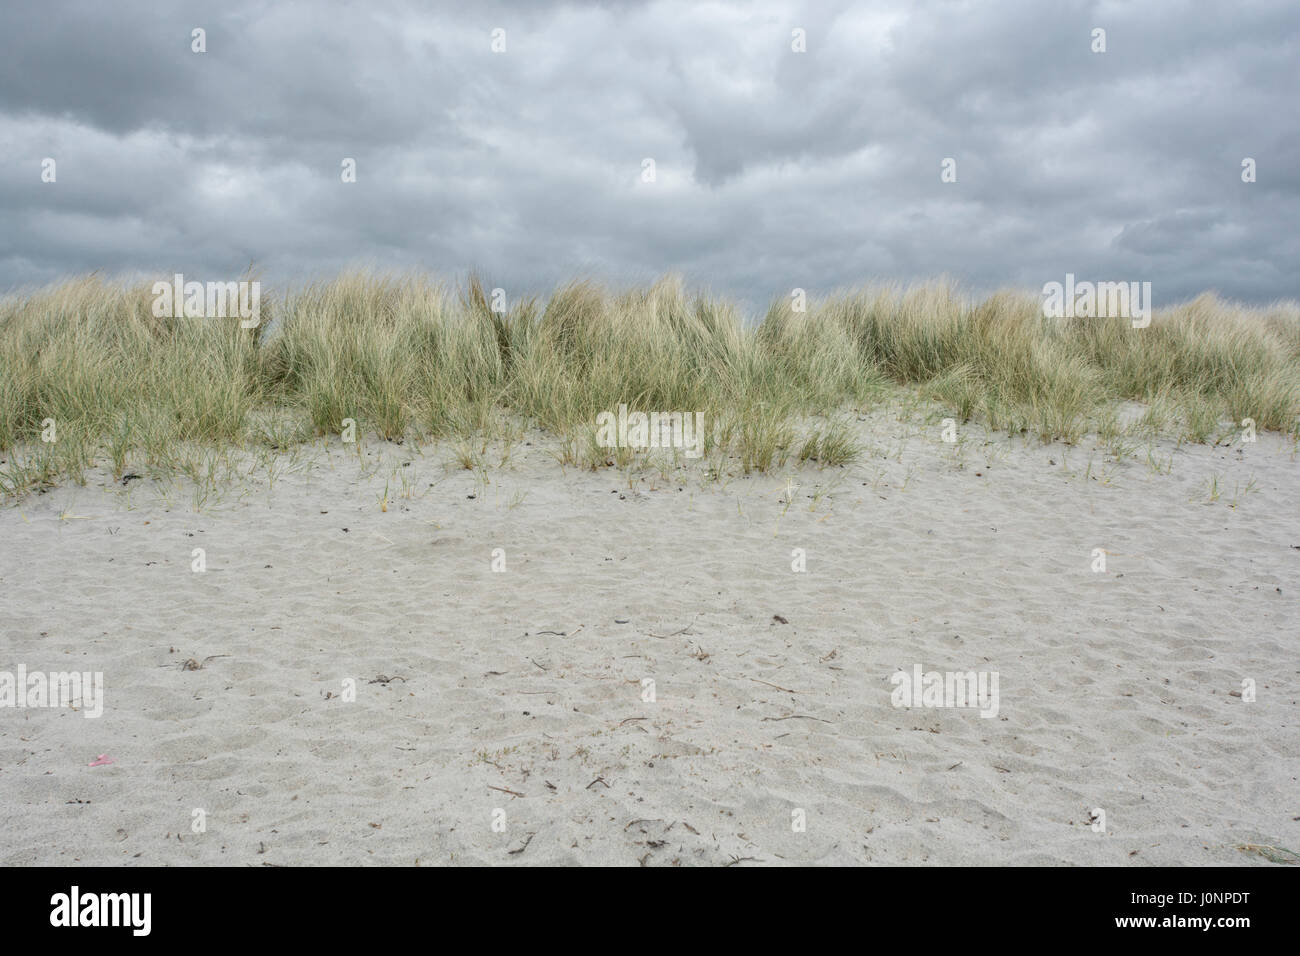 Strip / section of sand dunes with Marram Grass / Ammophila arenaria,  behind sandy beach - mid-Cornwall, UK Stock Photo